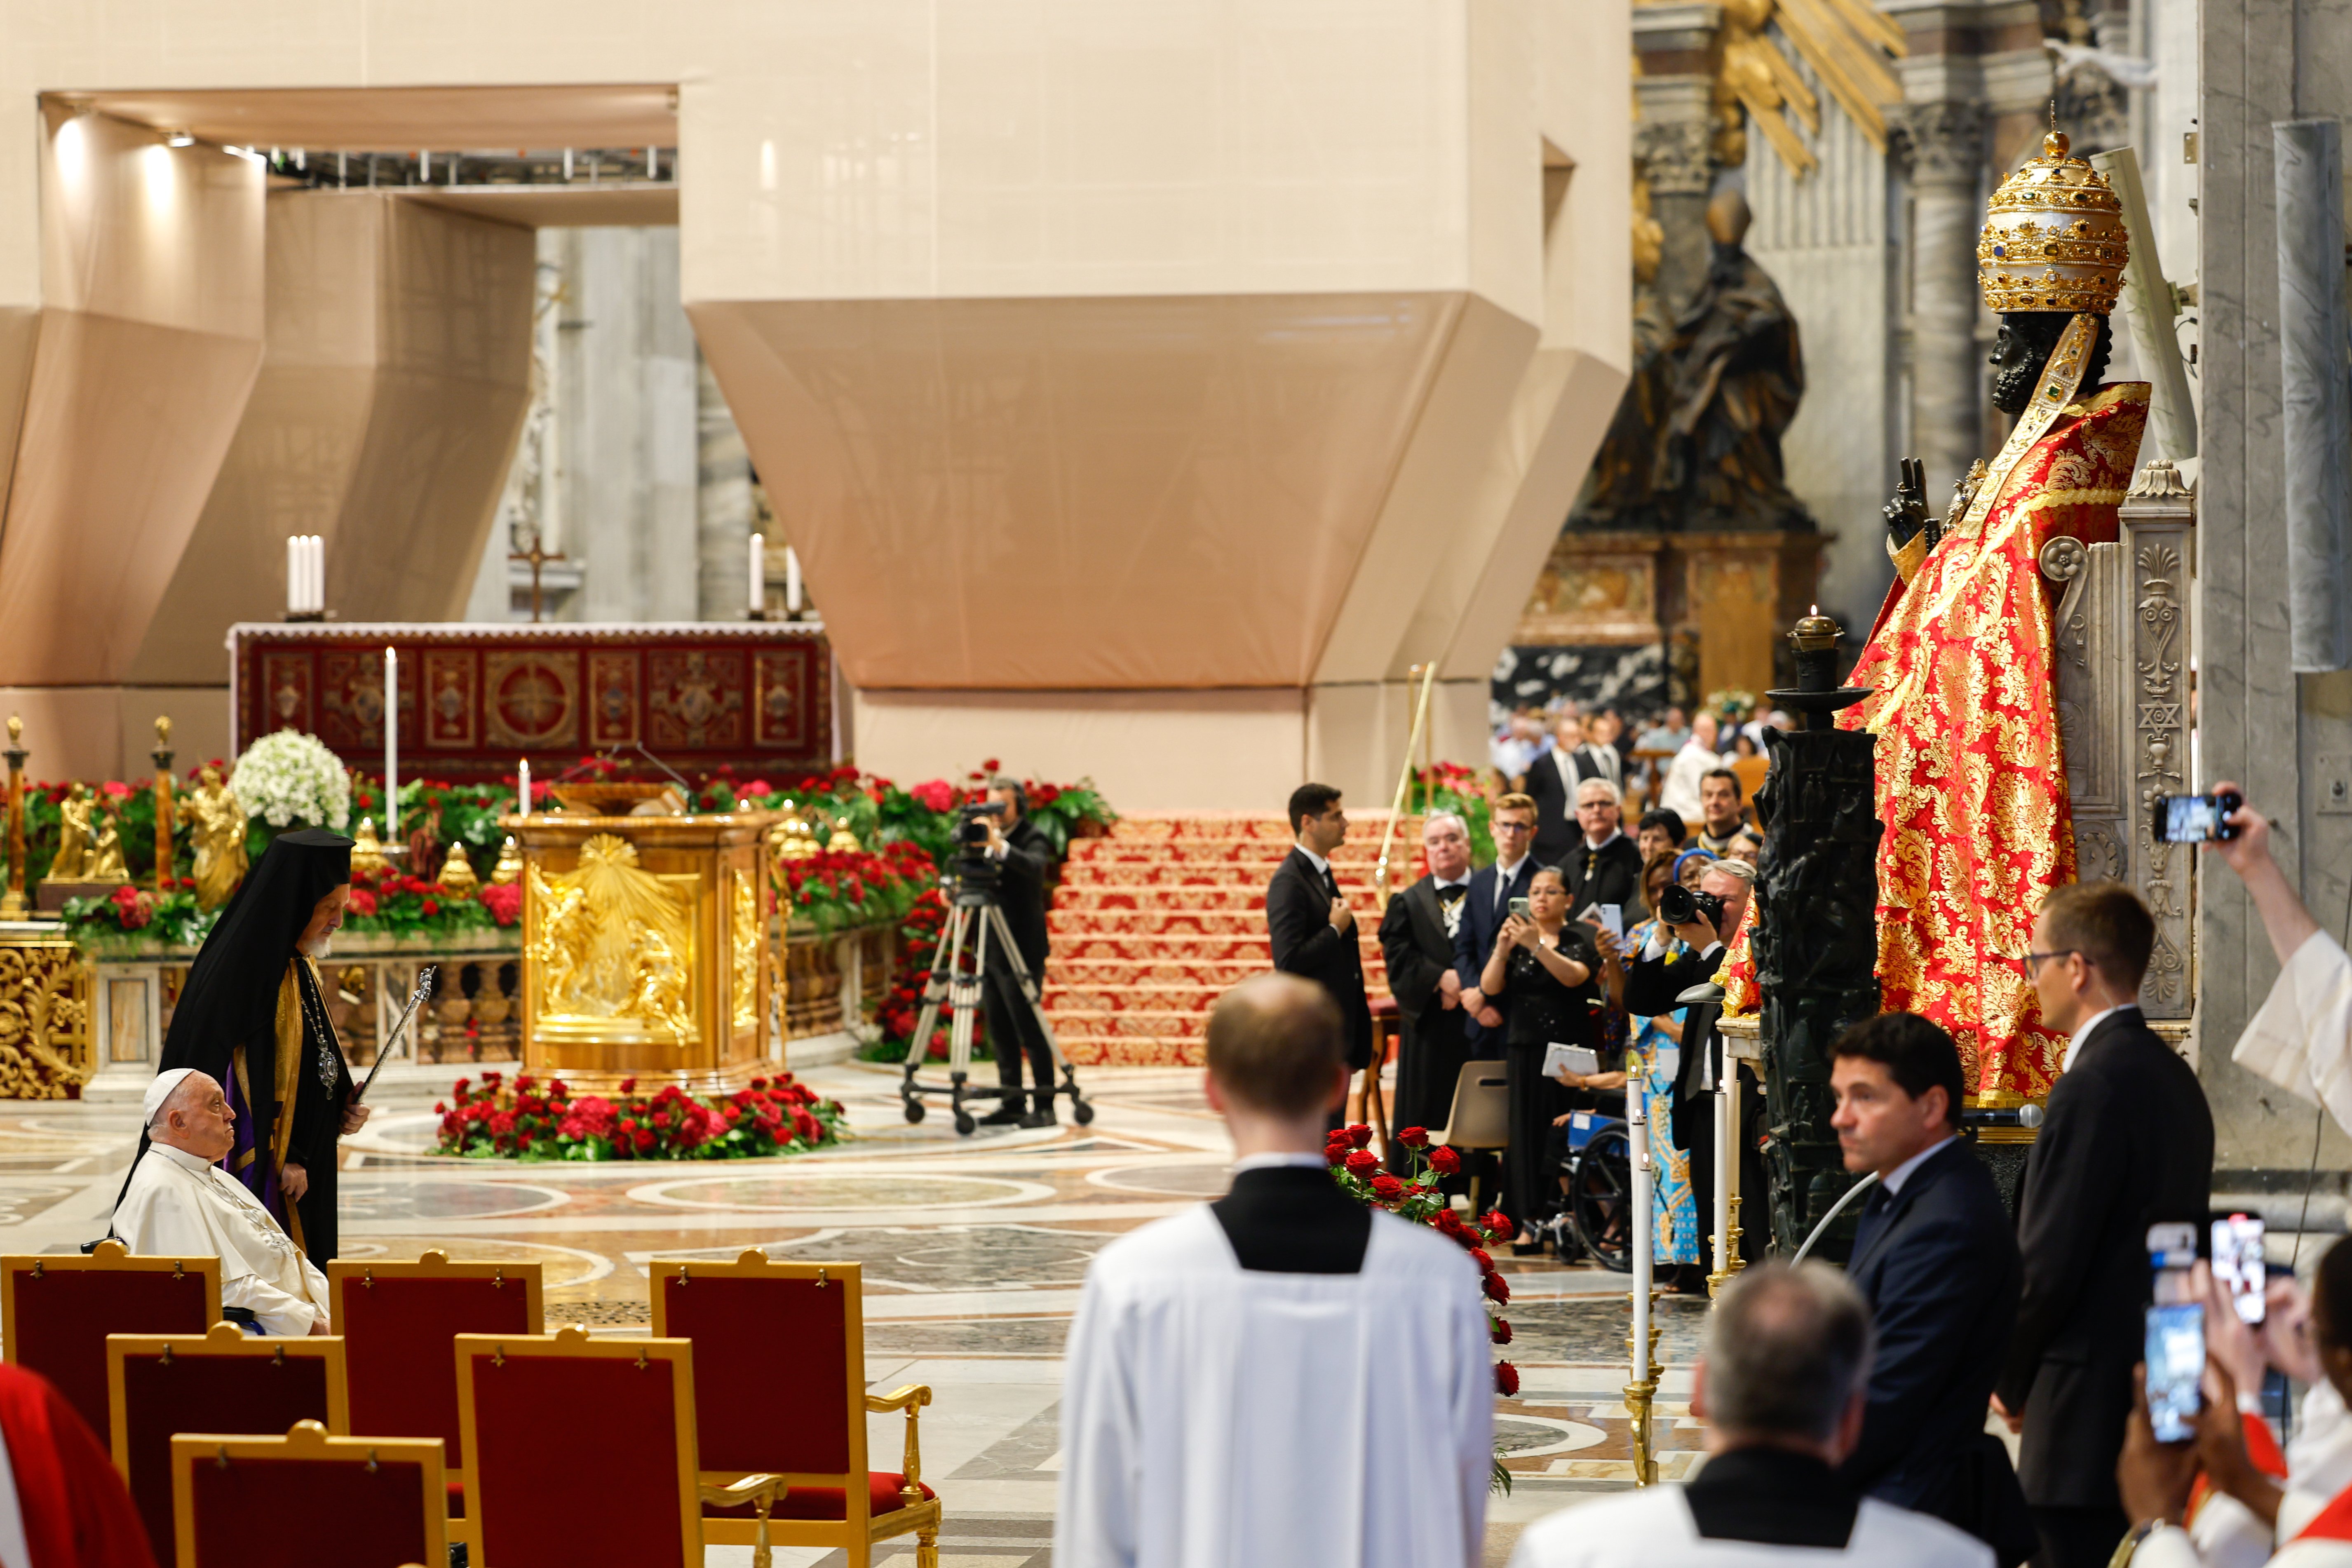 Pope Francis prays before a statue of St. Peter.